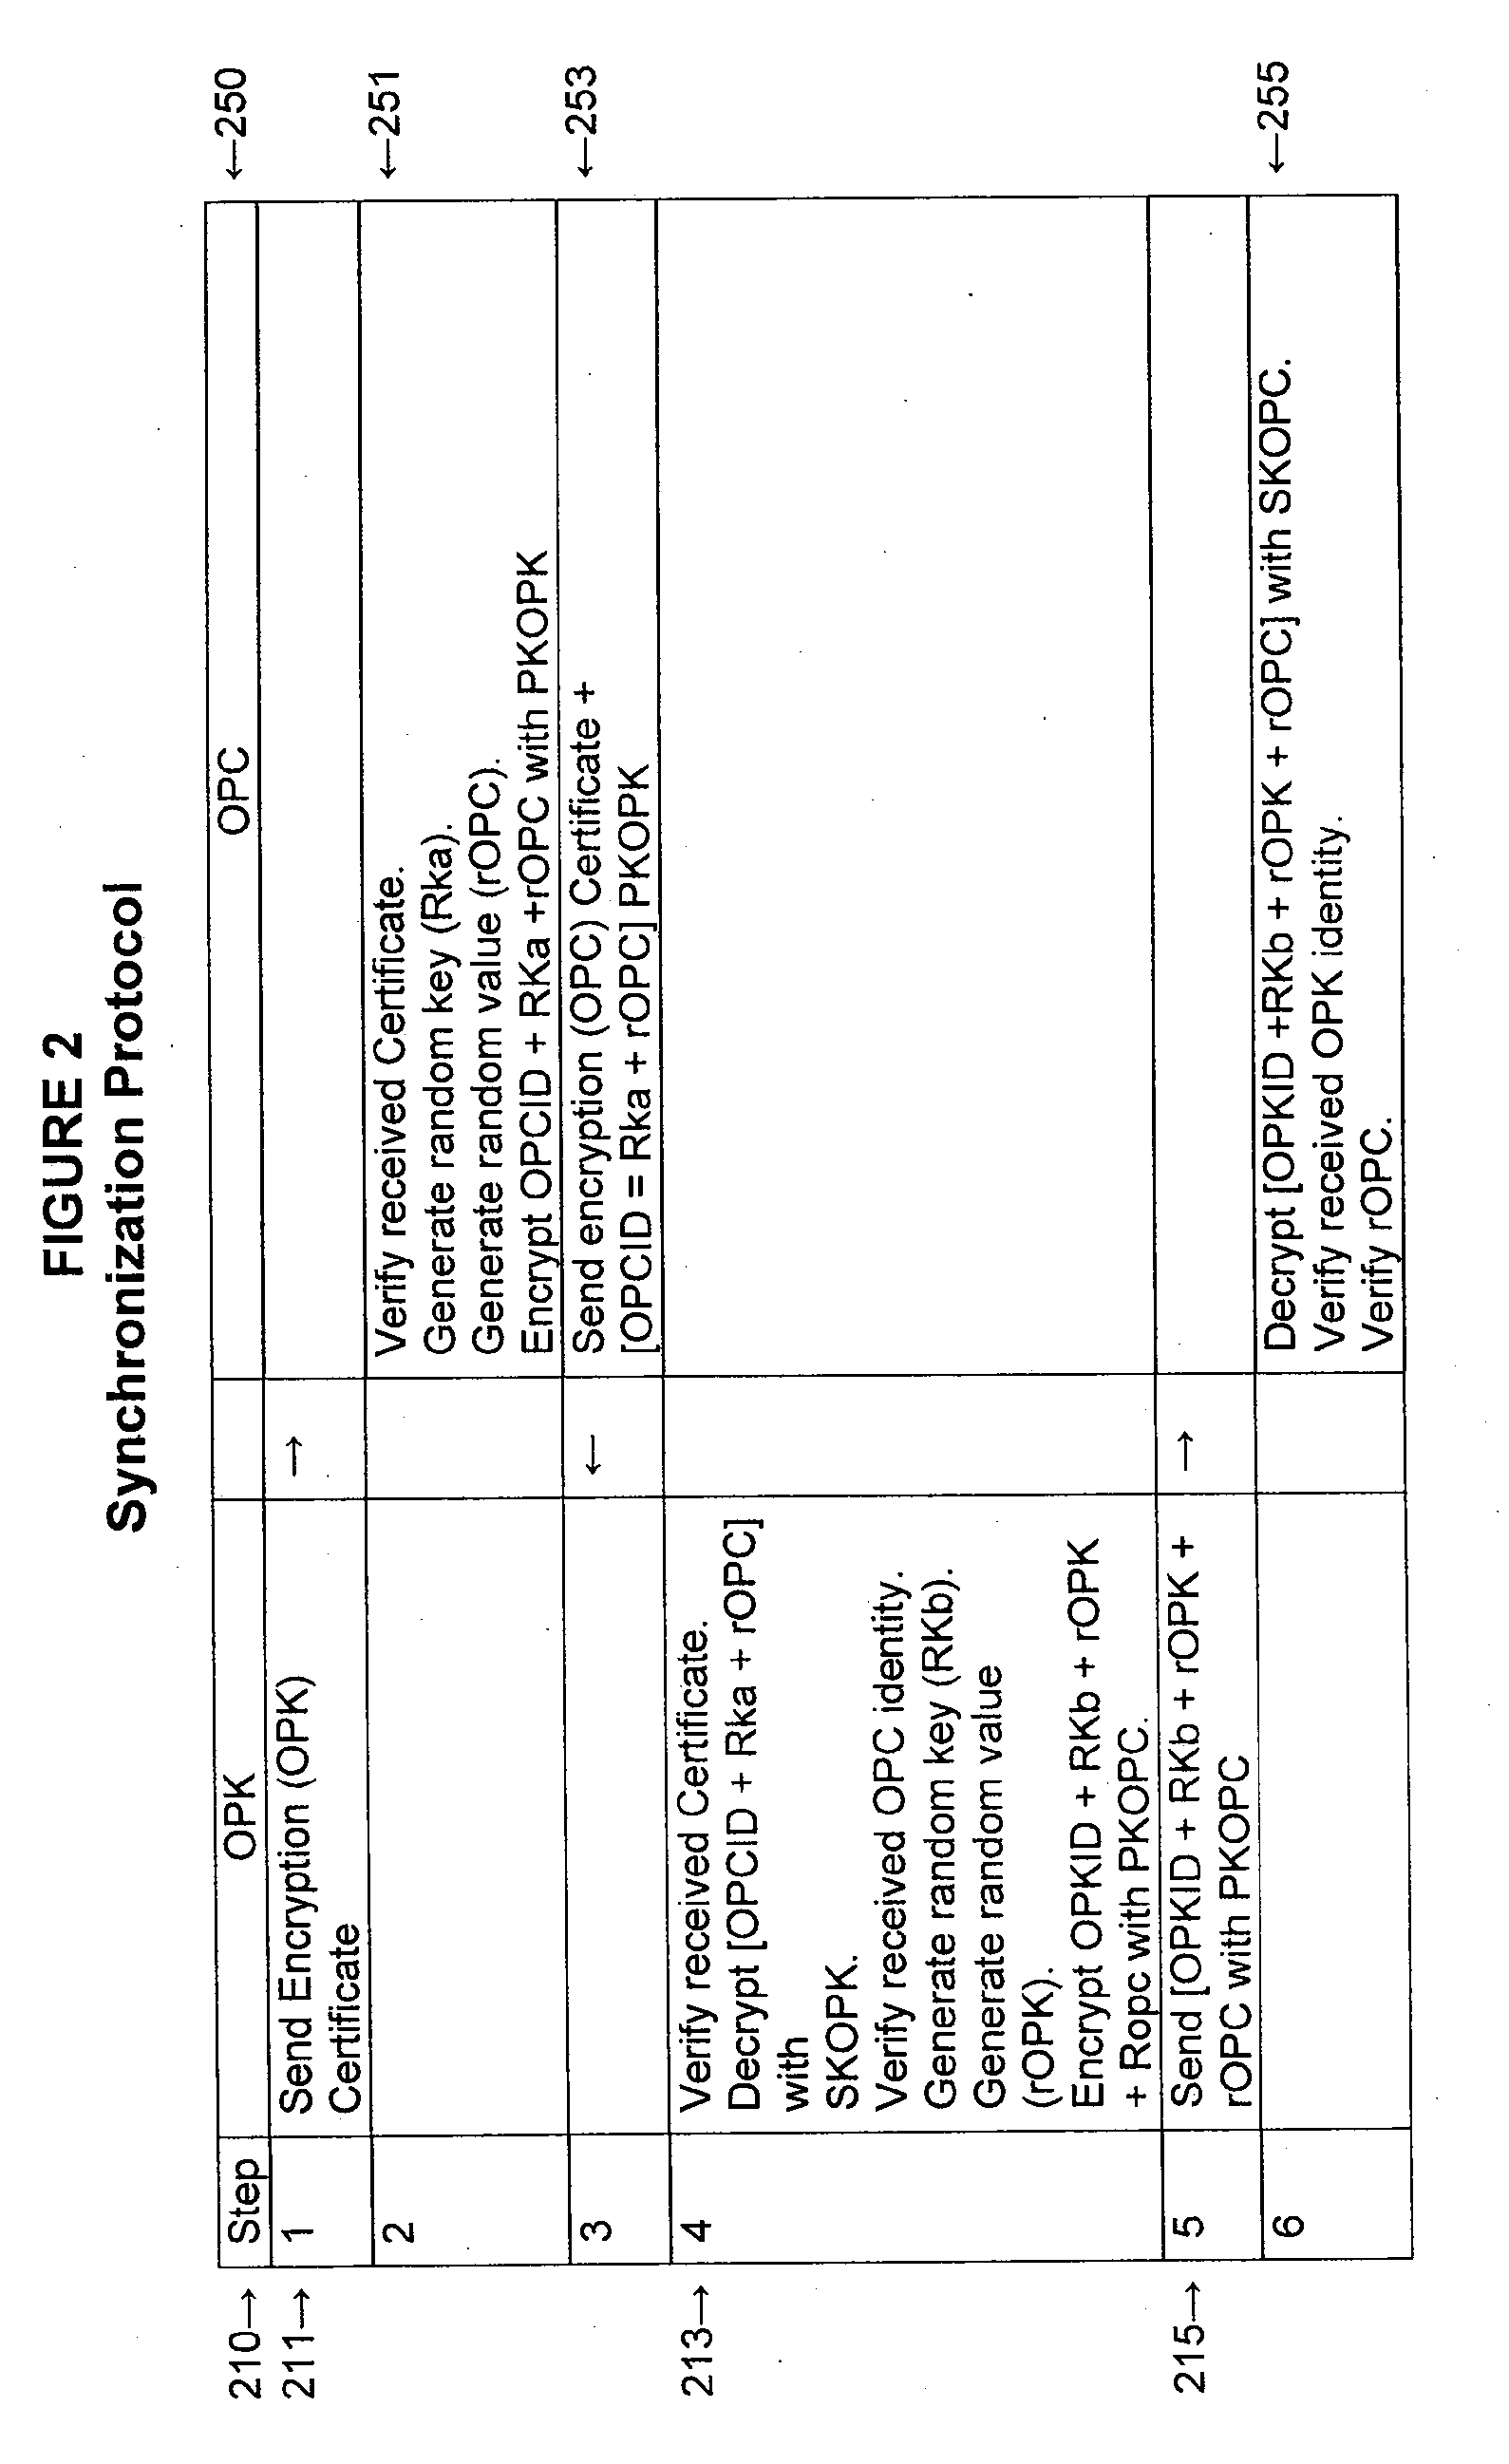 Methods and systems for security authentication and key exchange